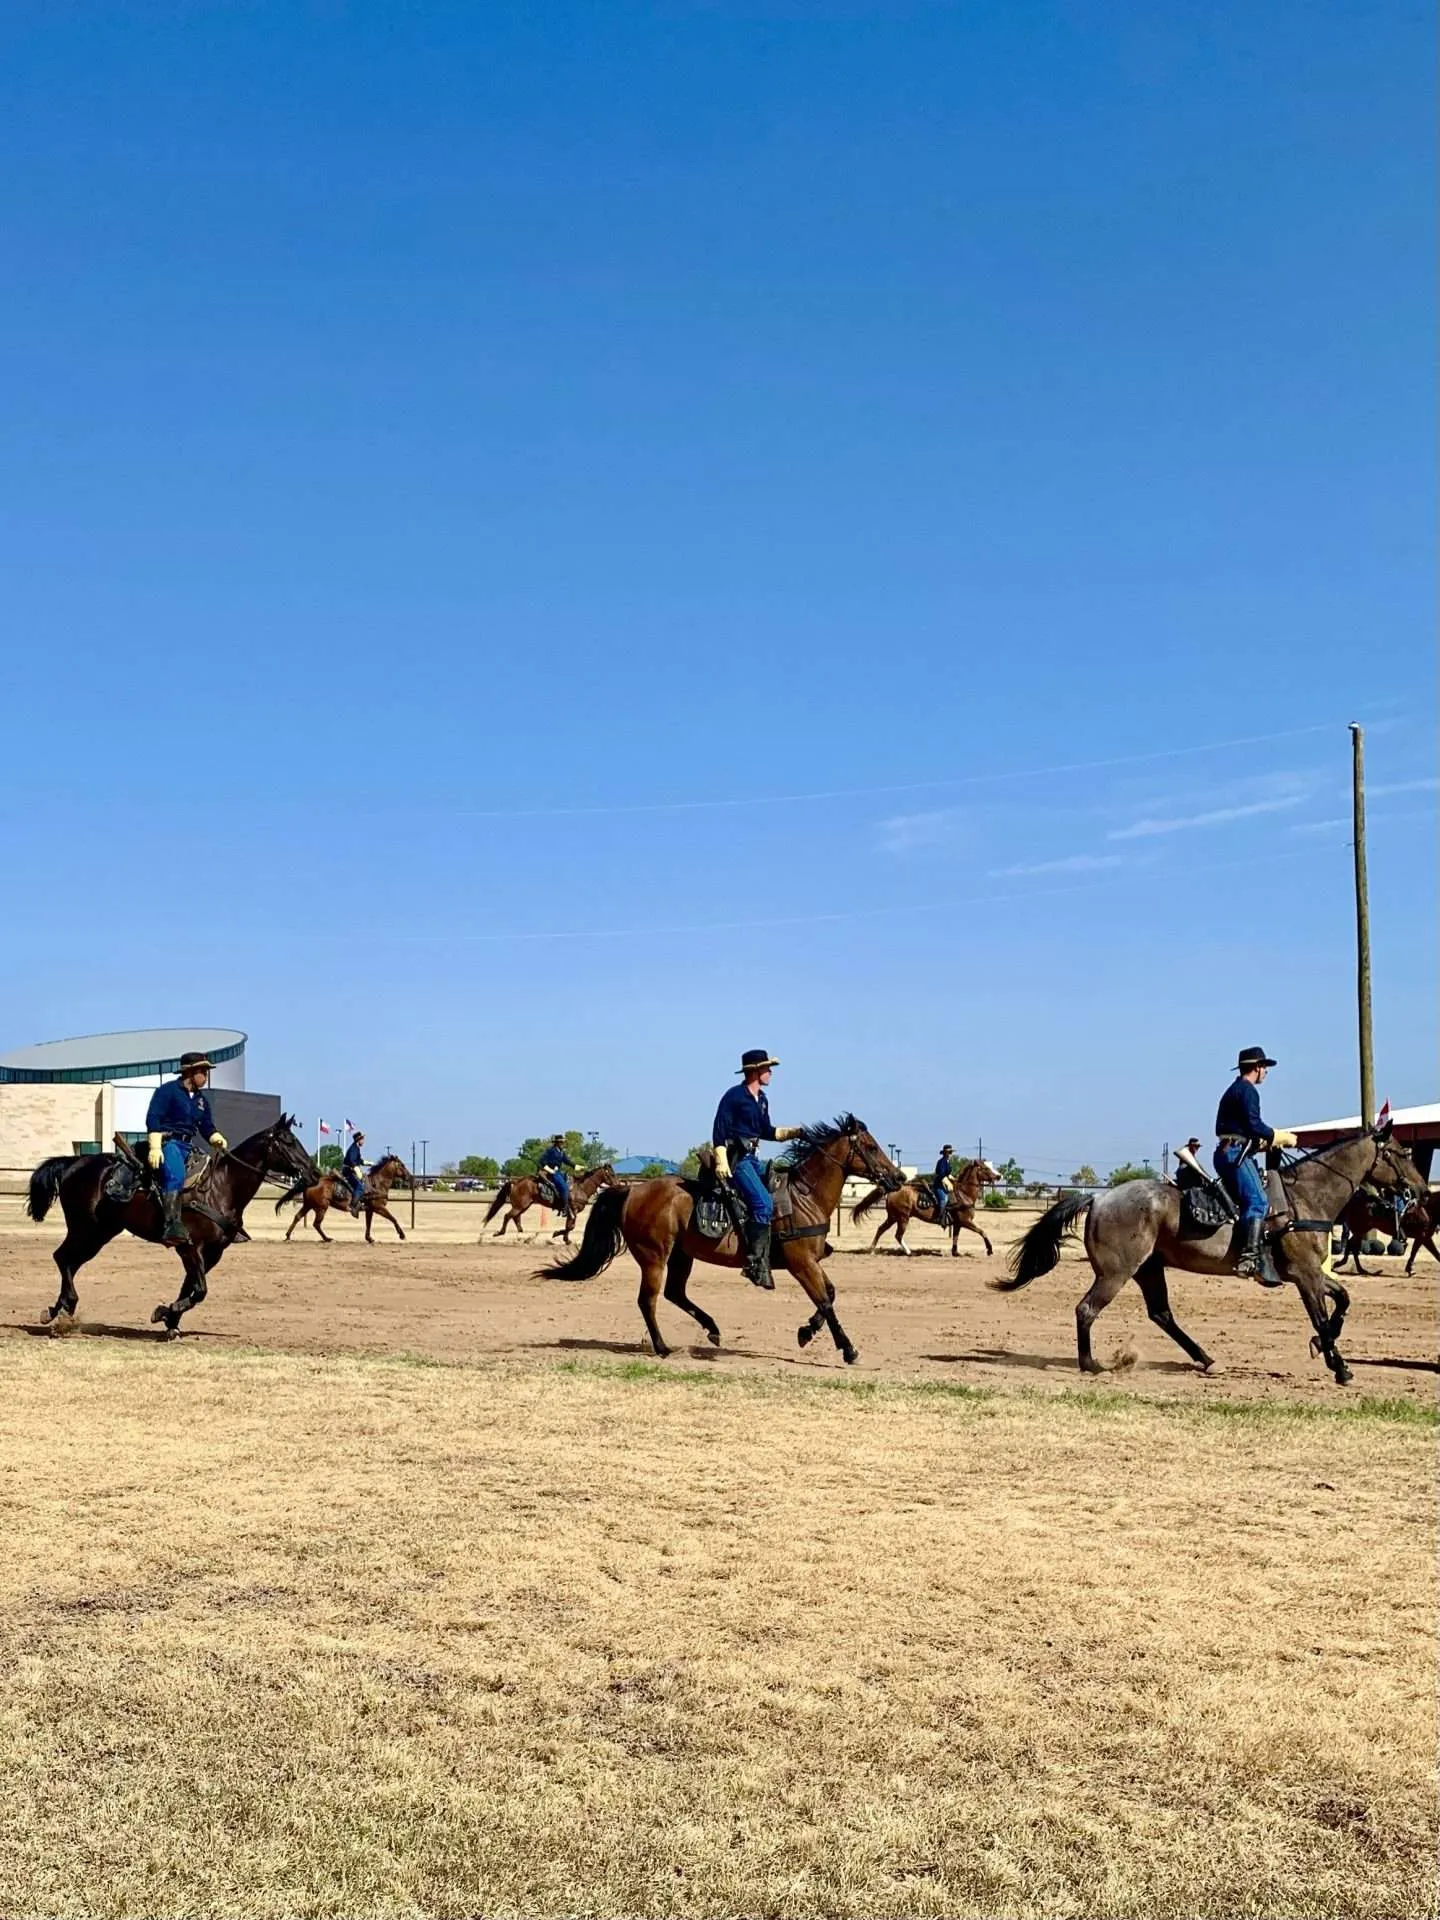 The Mounted Weapons Demonstration at Fort Cavazos, Texas.